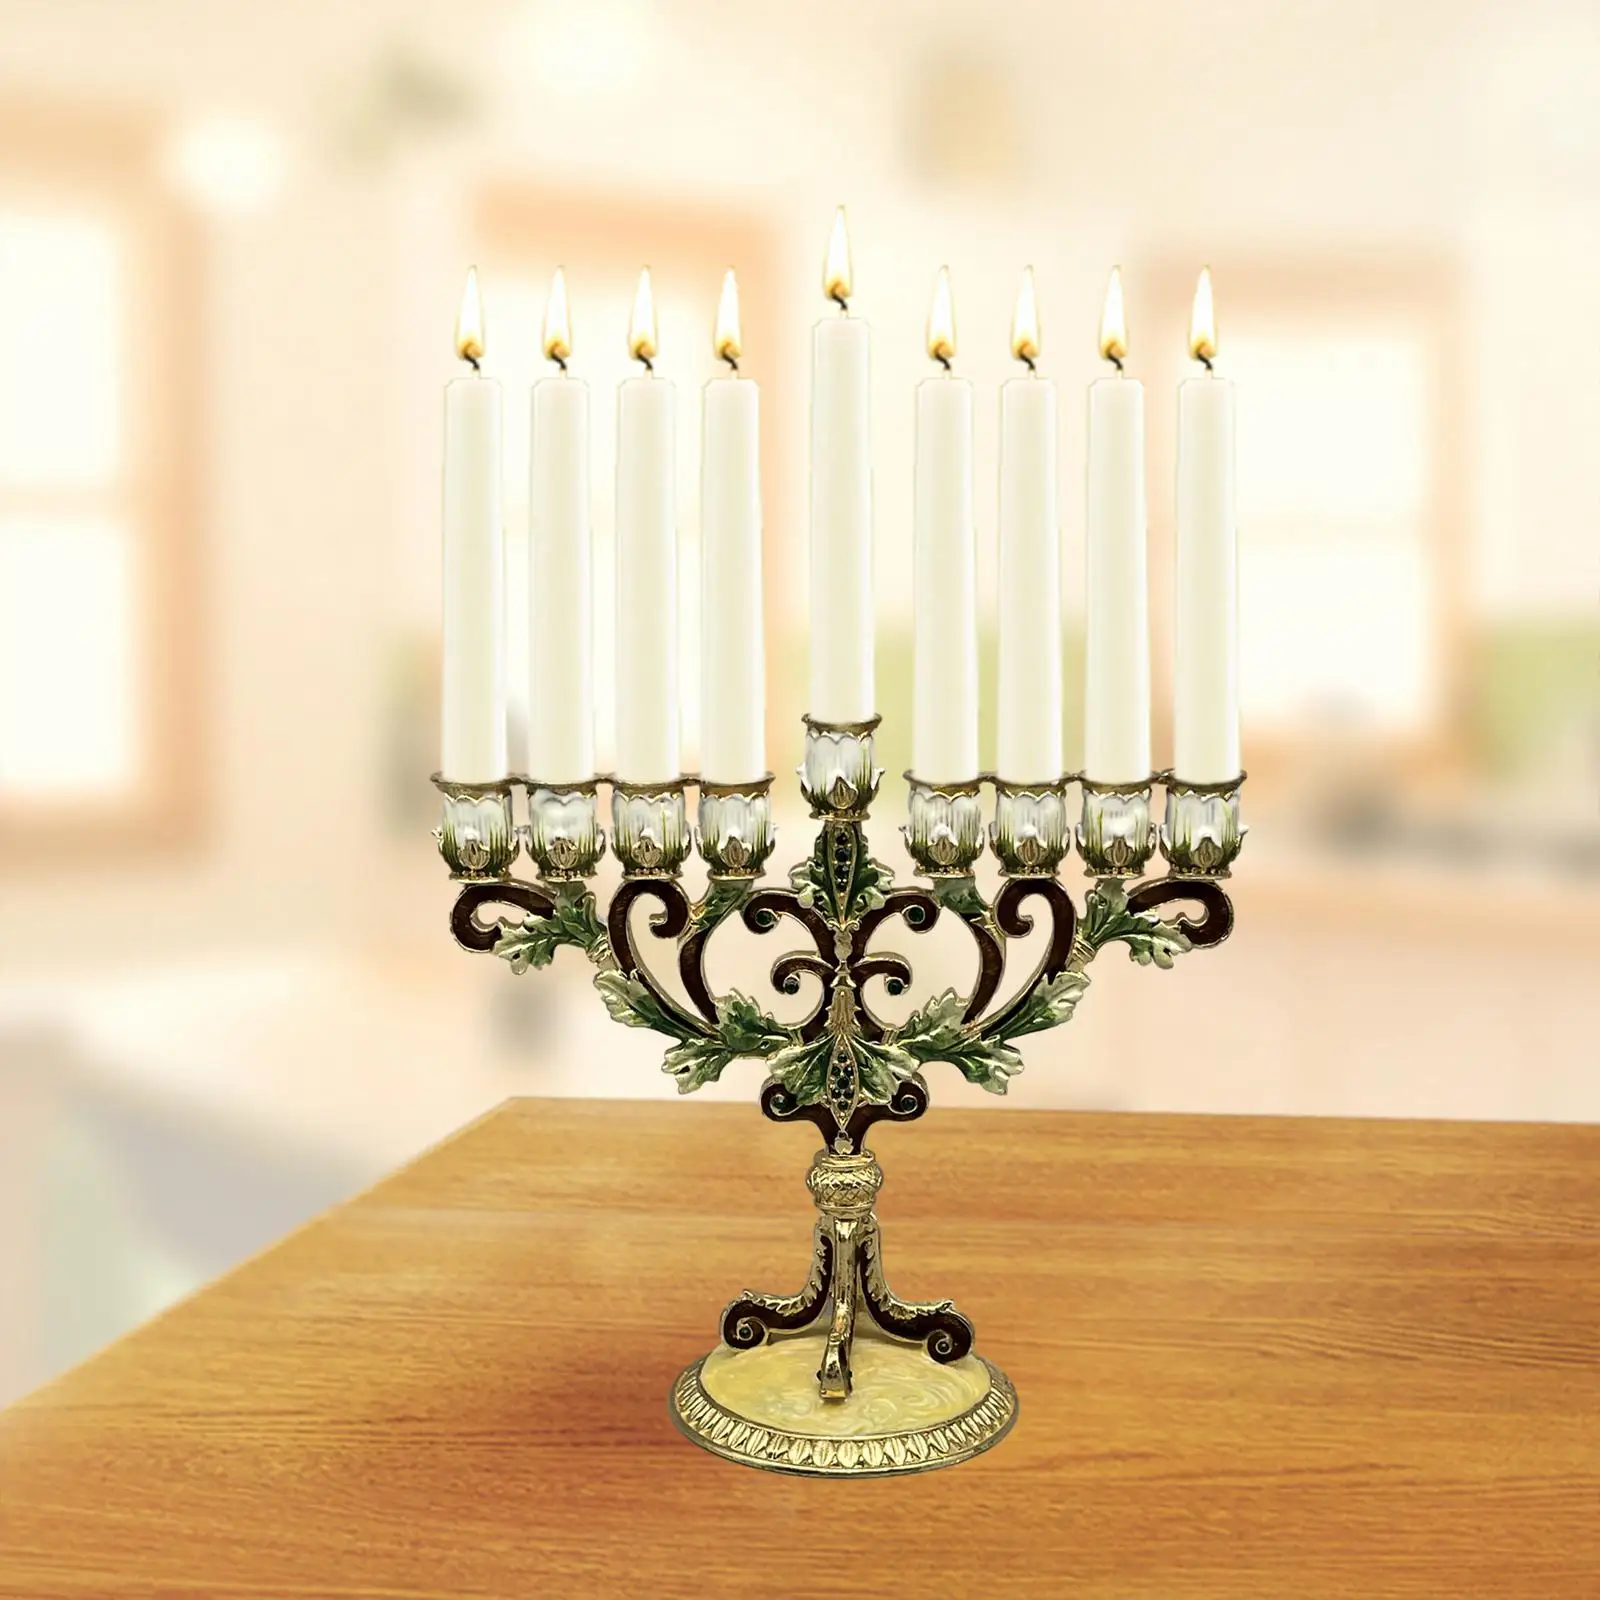 9 Branches Candle Holder Table Centerpiece Candle Stands Hanukkah Menorah